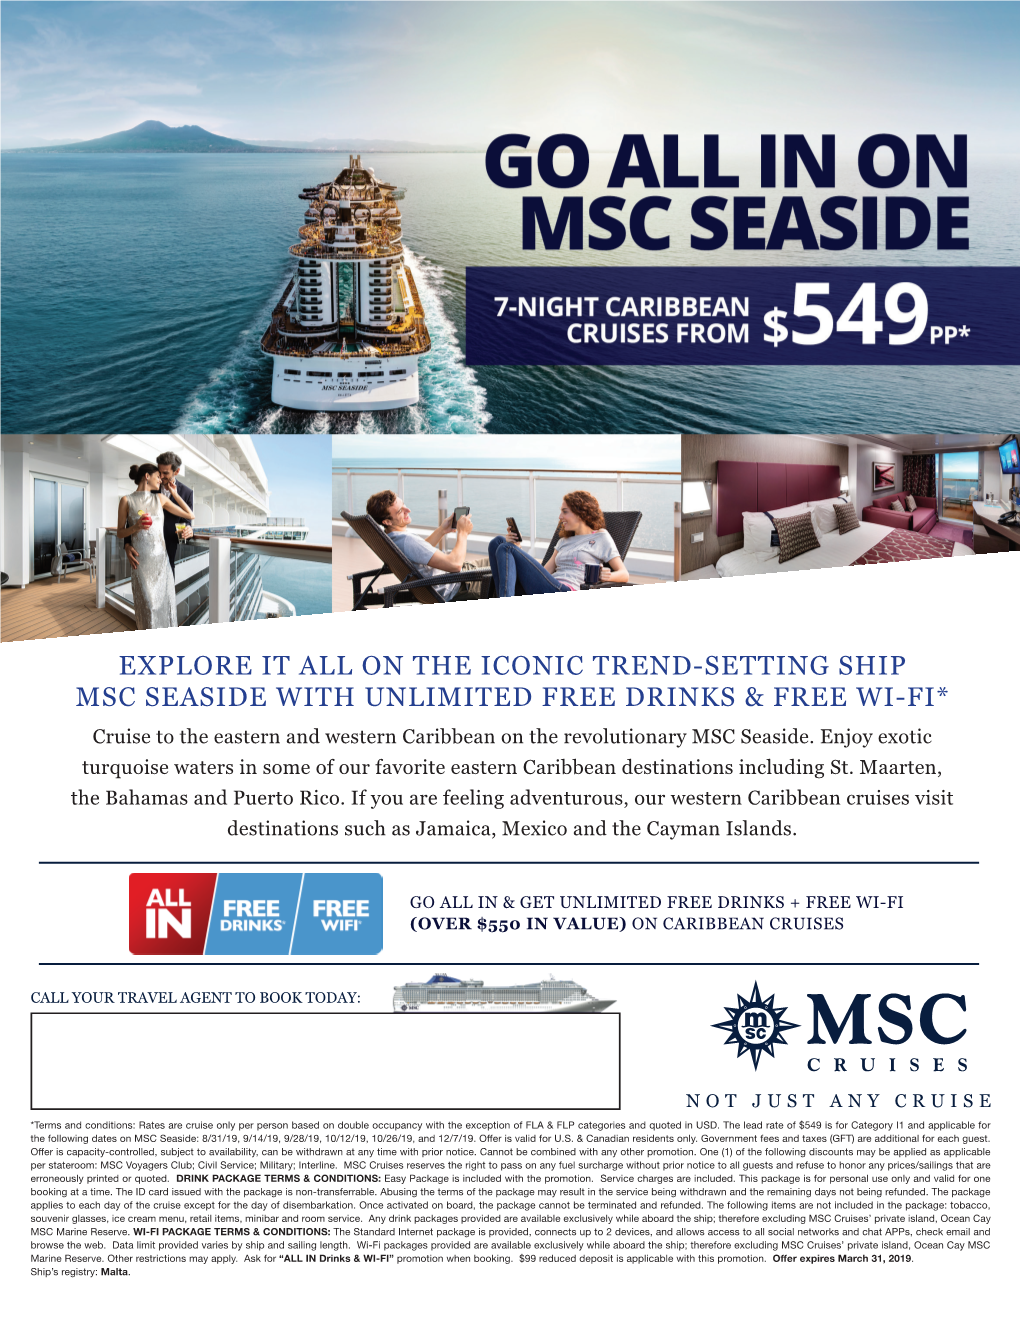 Explore It All on the Iconic Trend-Setting Ship Msc